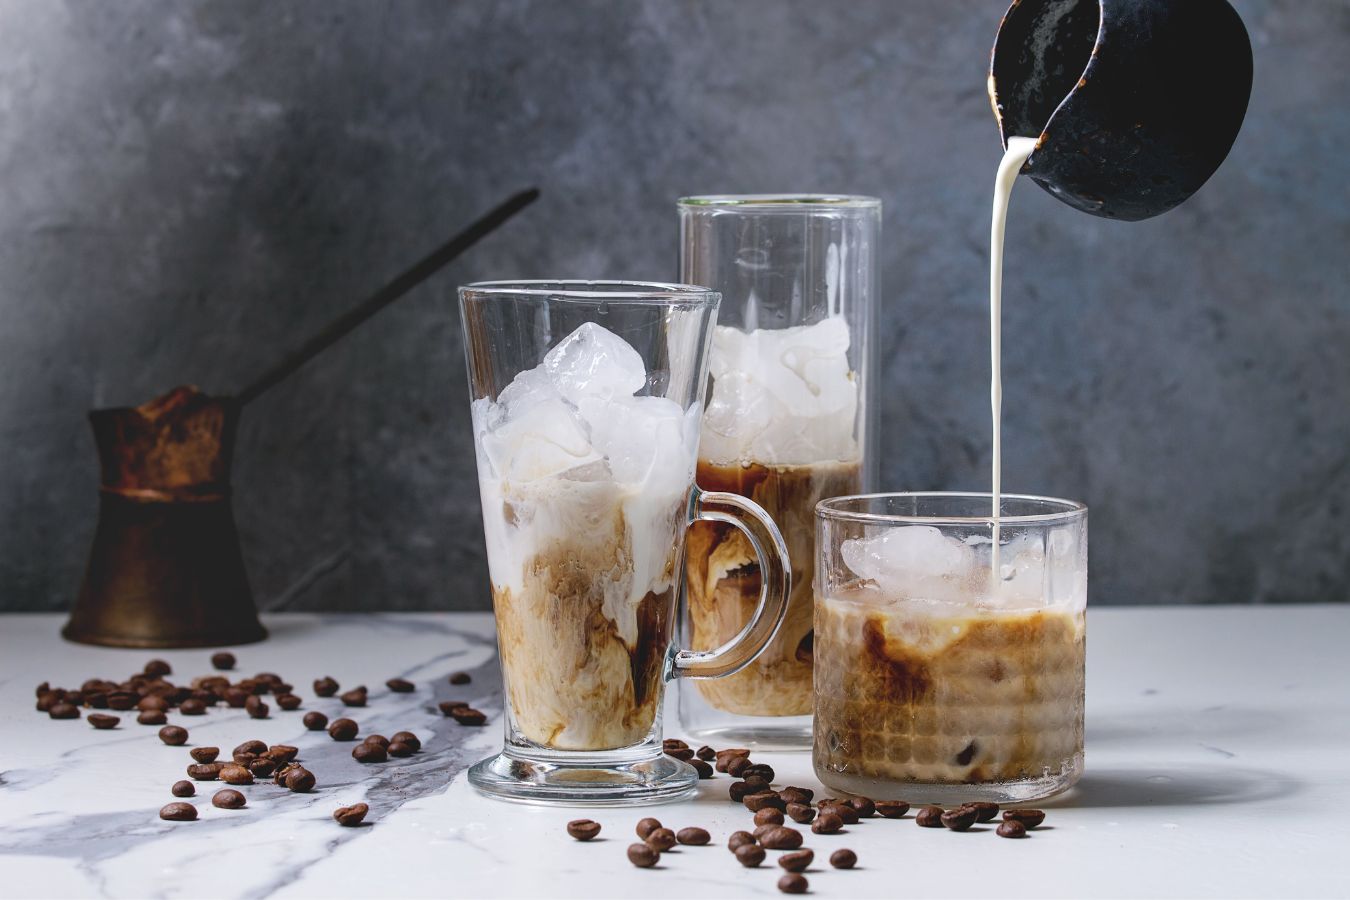 What Are Best Beans For Iced Coffee?